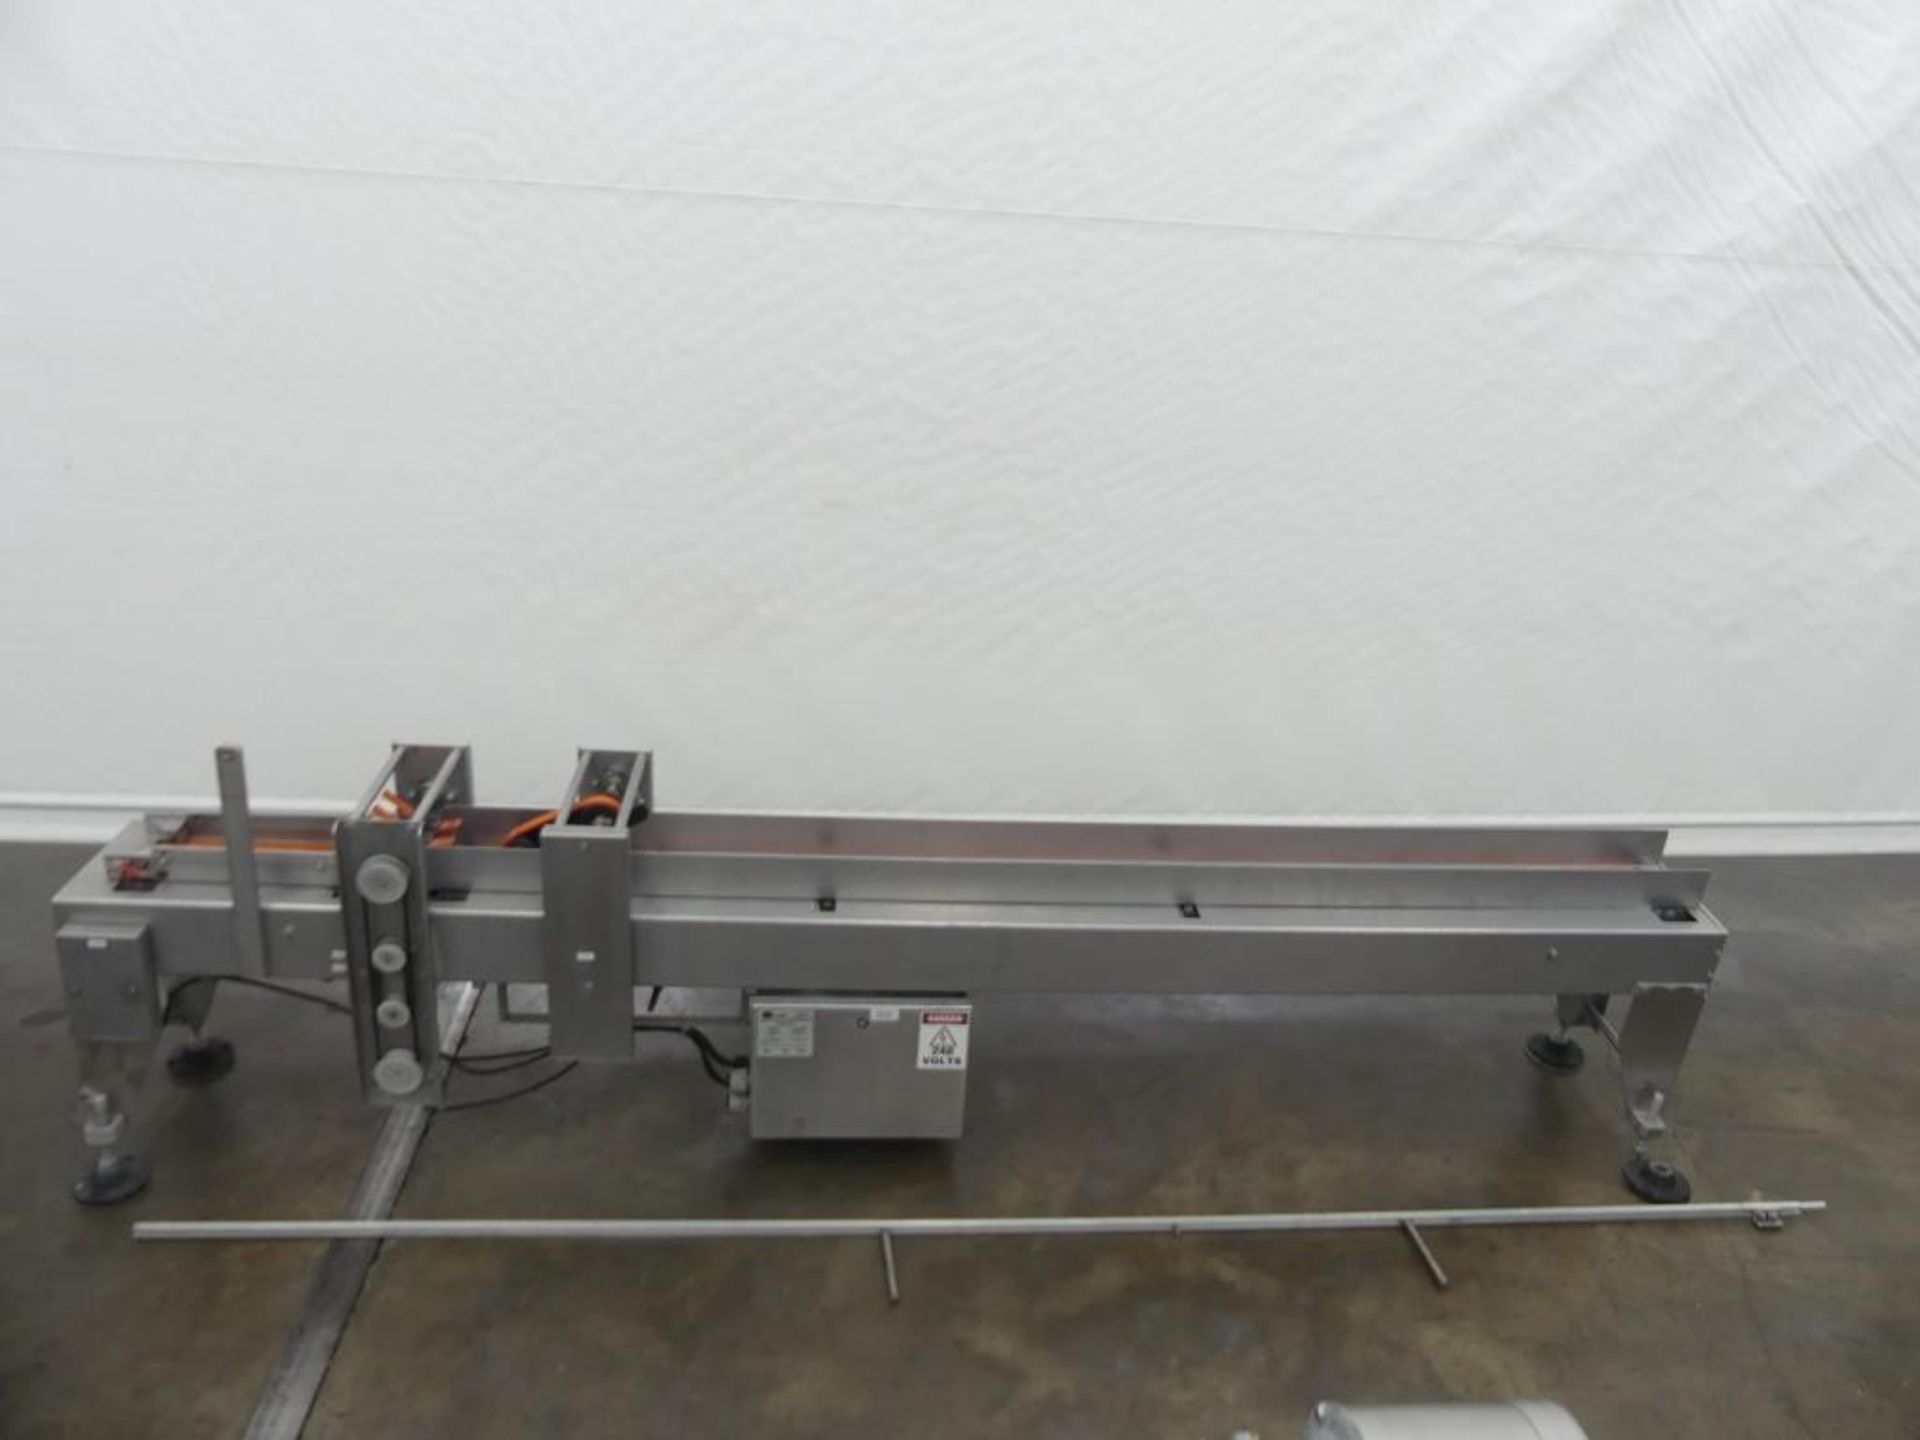 Massman HFFS-IM1000 Flexible Pouch Packaging System - Image 61 of 127